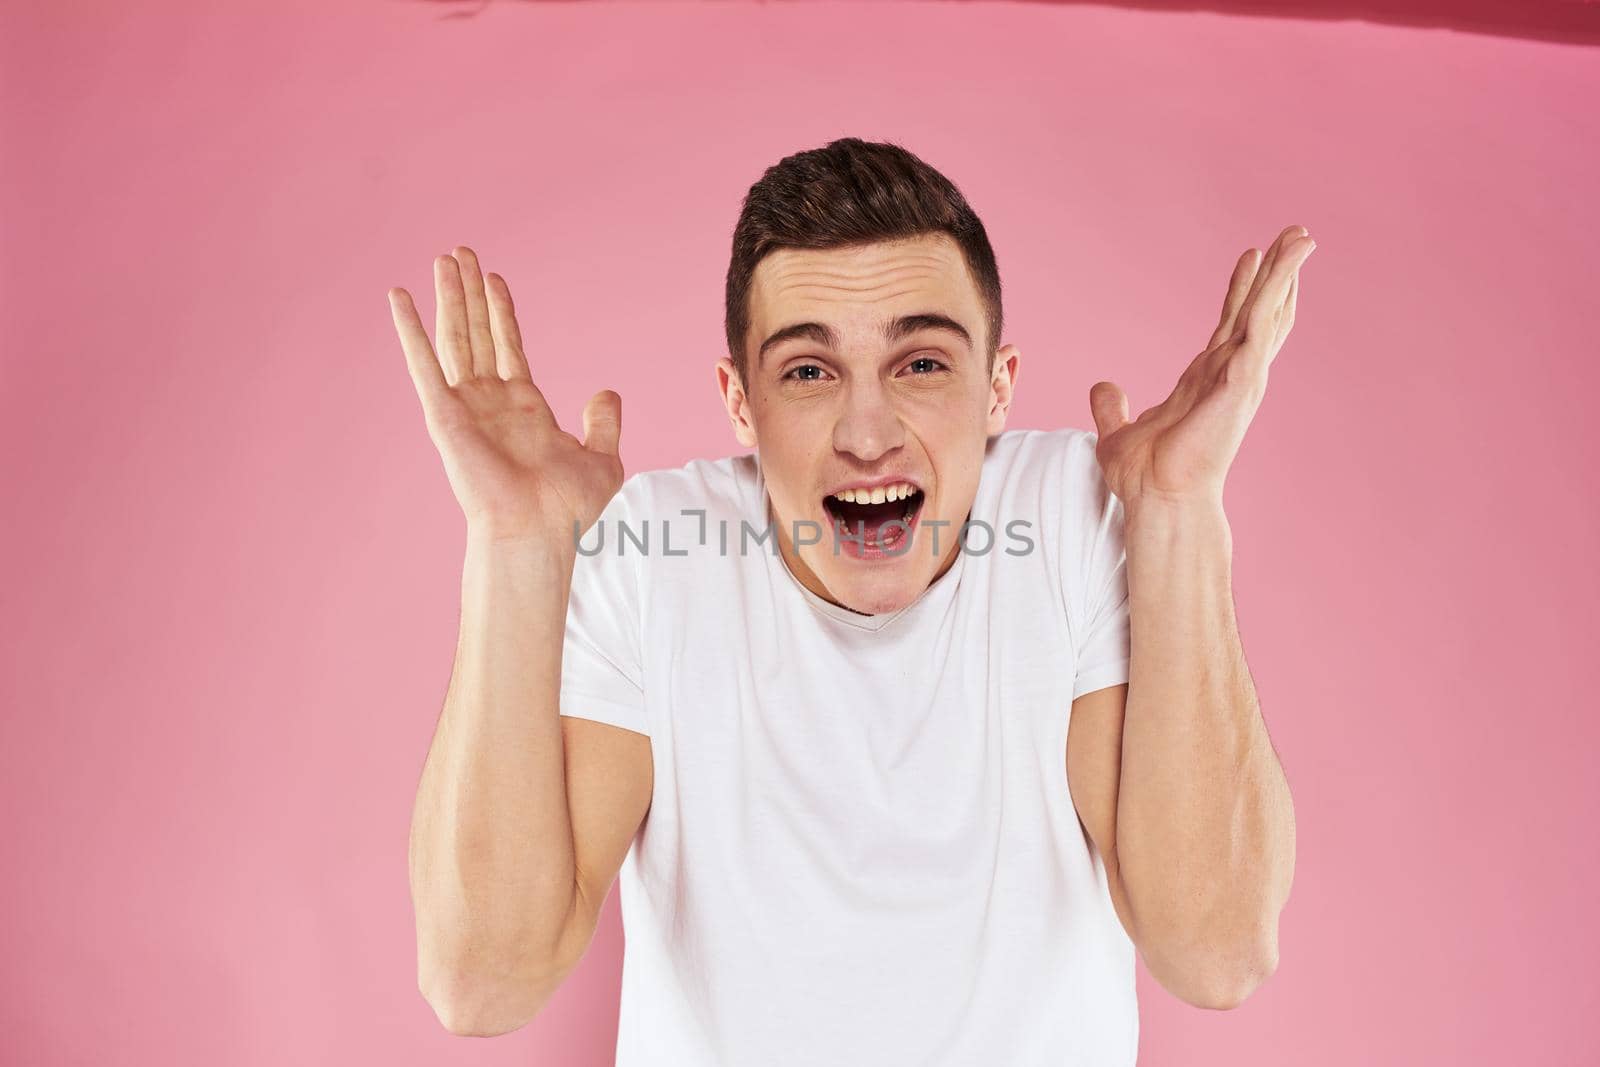 A man in a white t-shirt gestures with his hands emotions pink background studio cropped view by SHOTPRIME